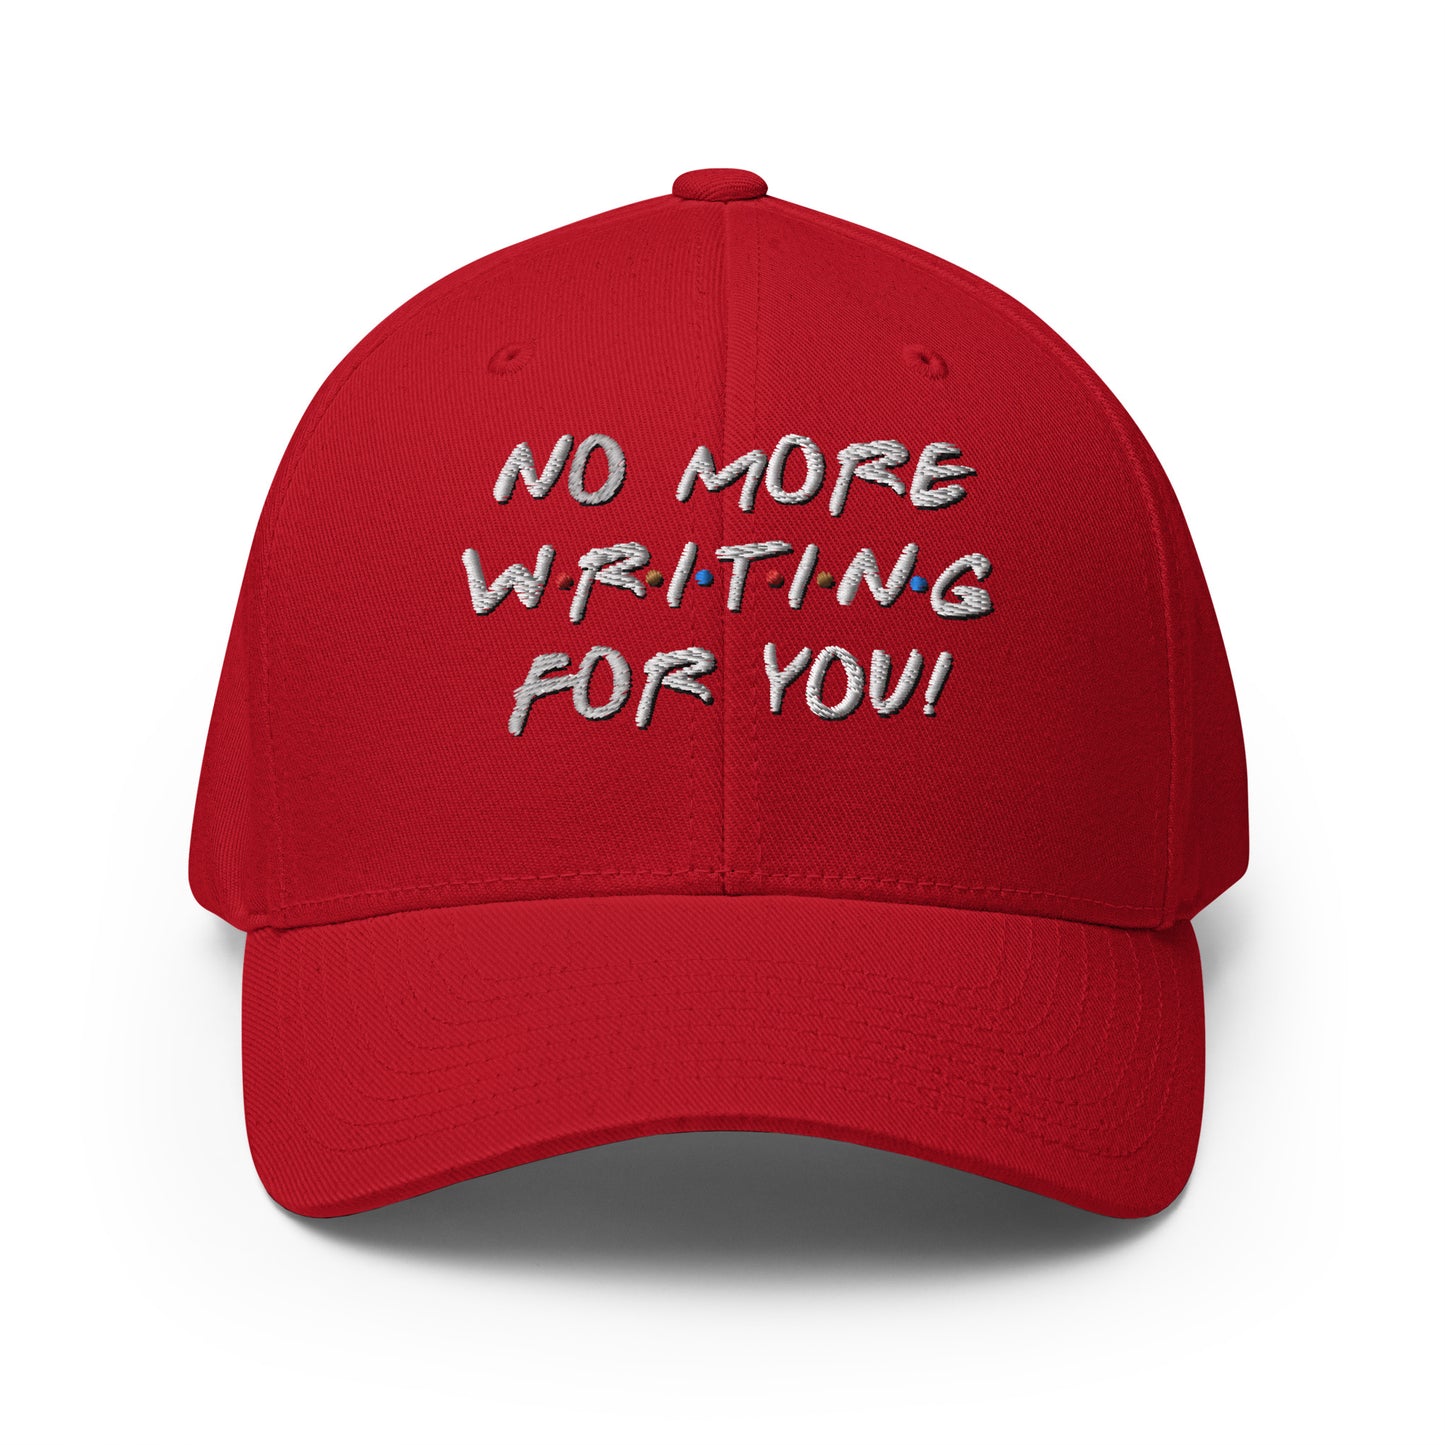 No More Writing for You! Flexfit Hat